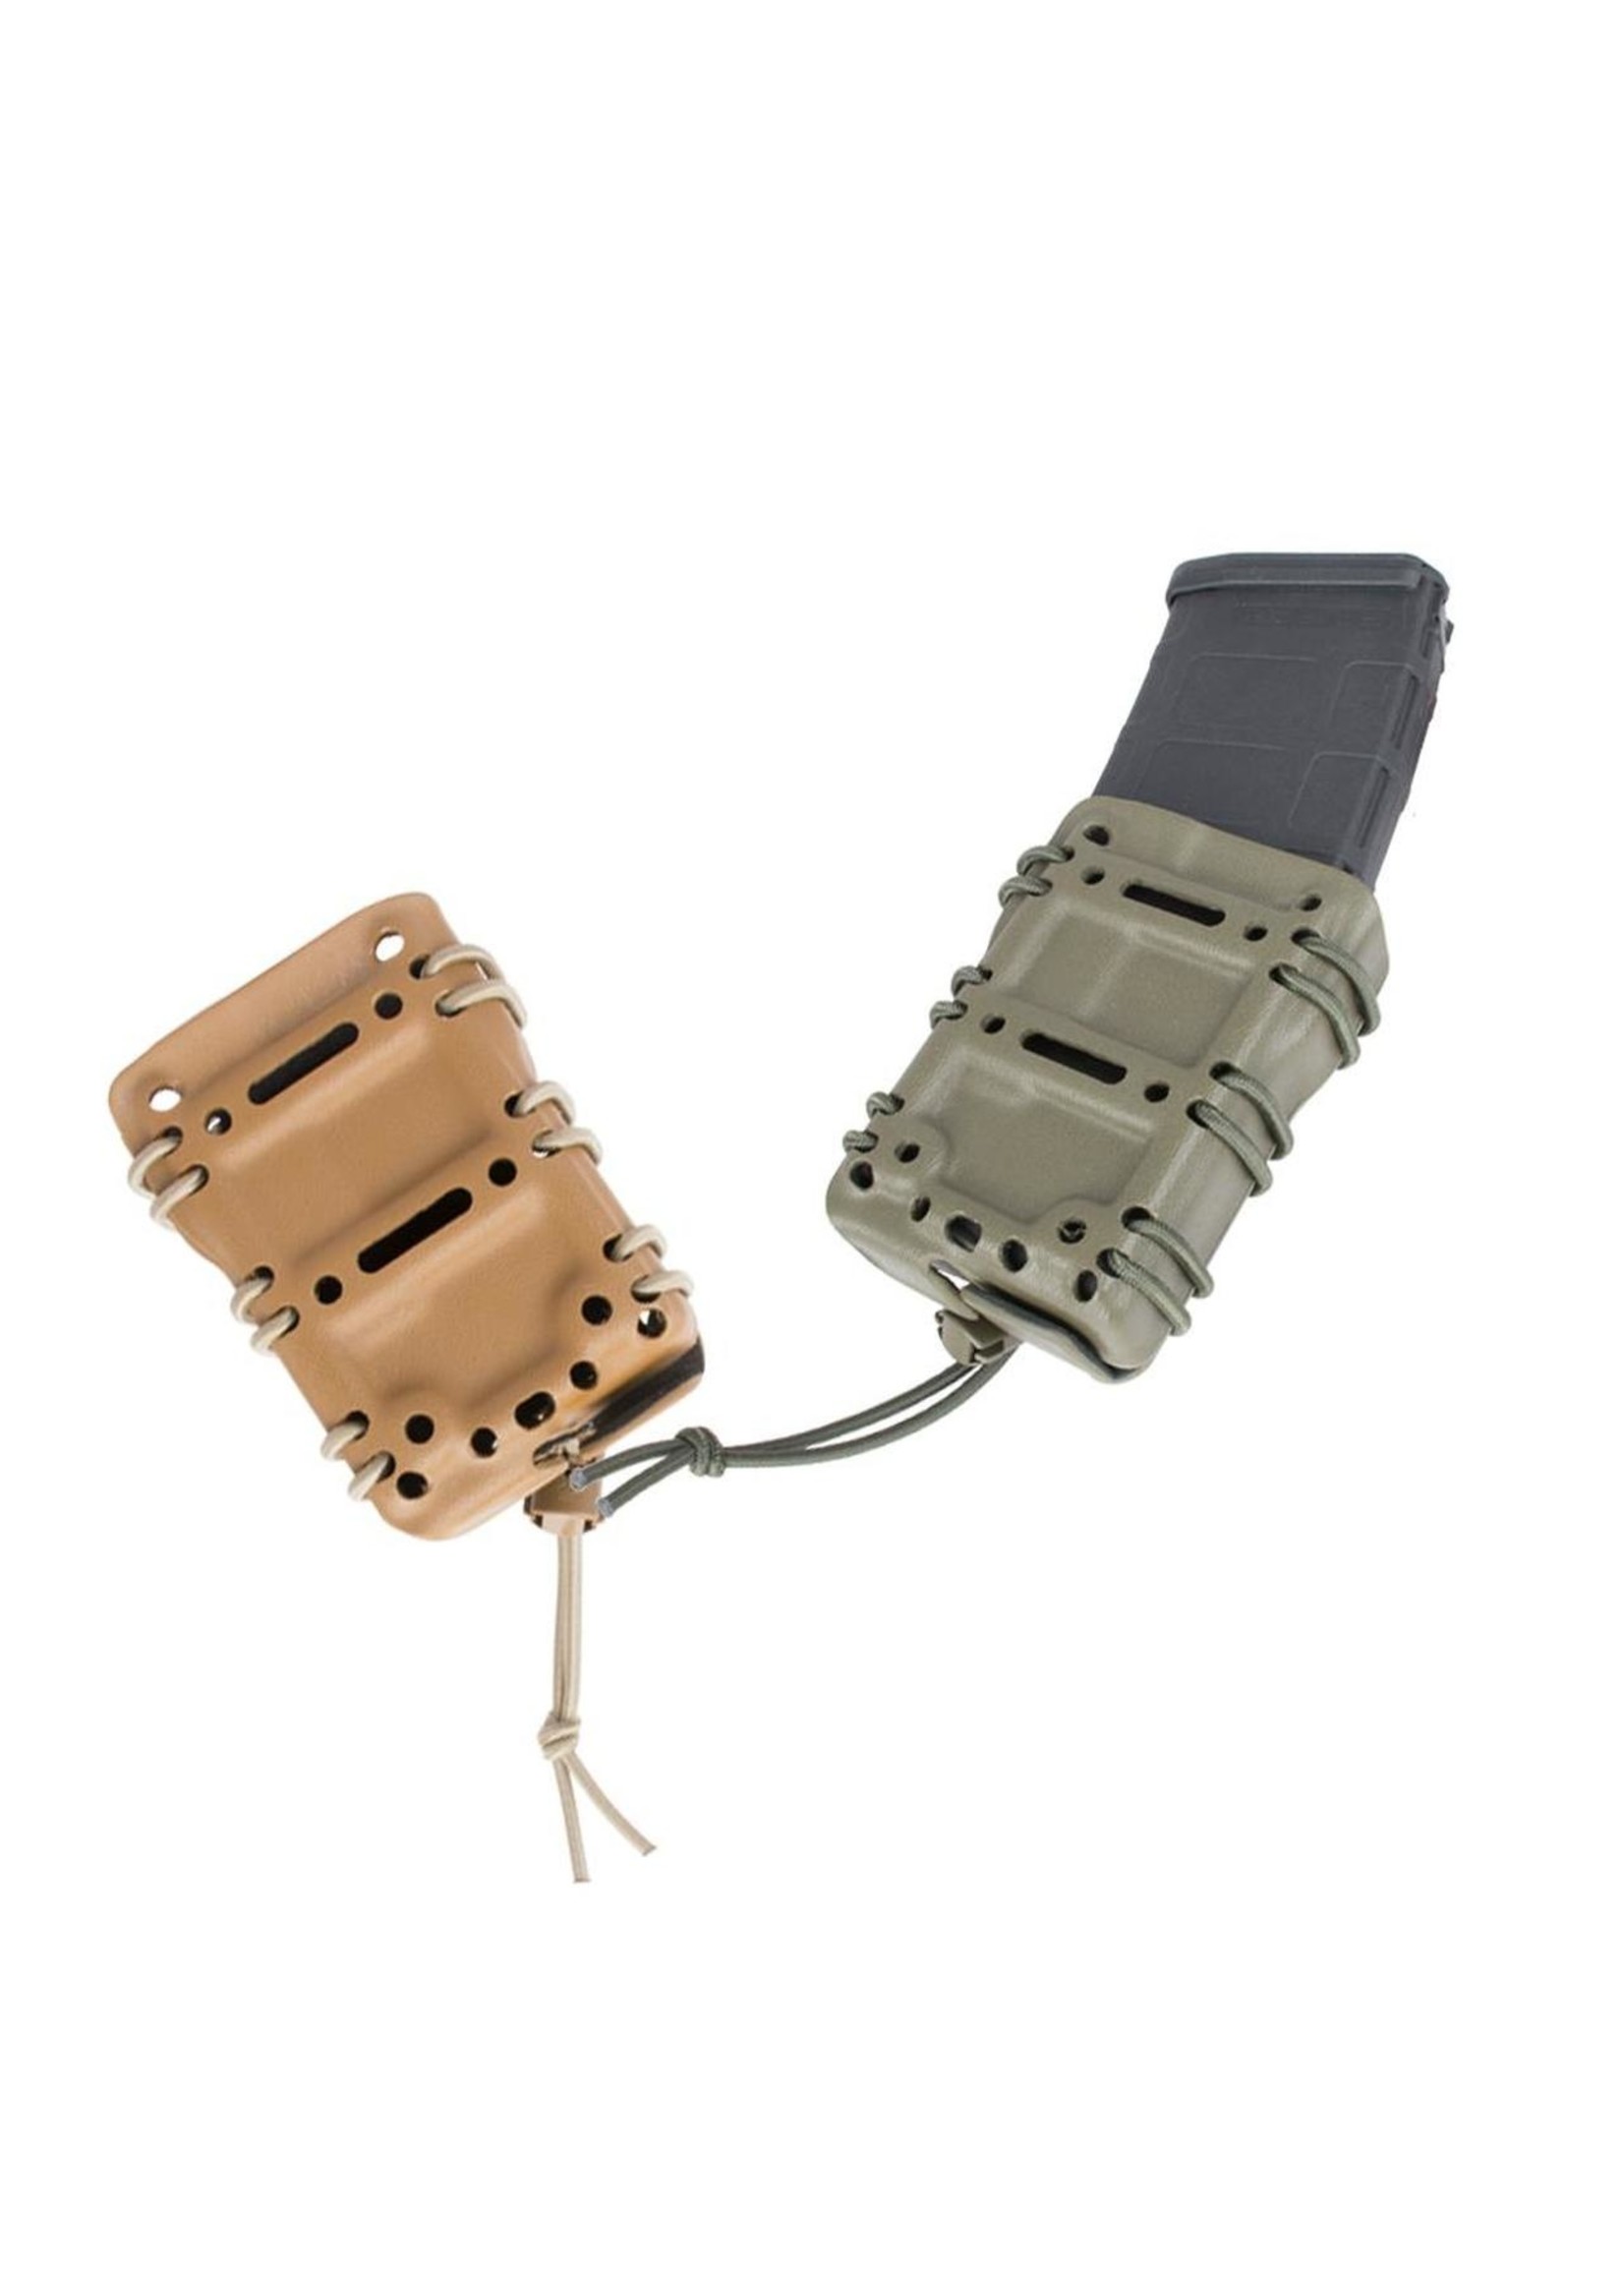 G-CODE SCORPION RIFLE MAG CARRIER